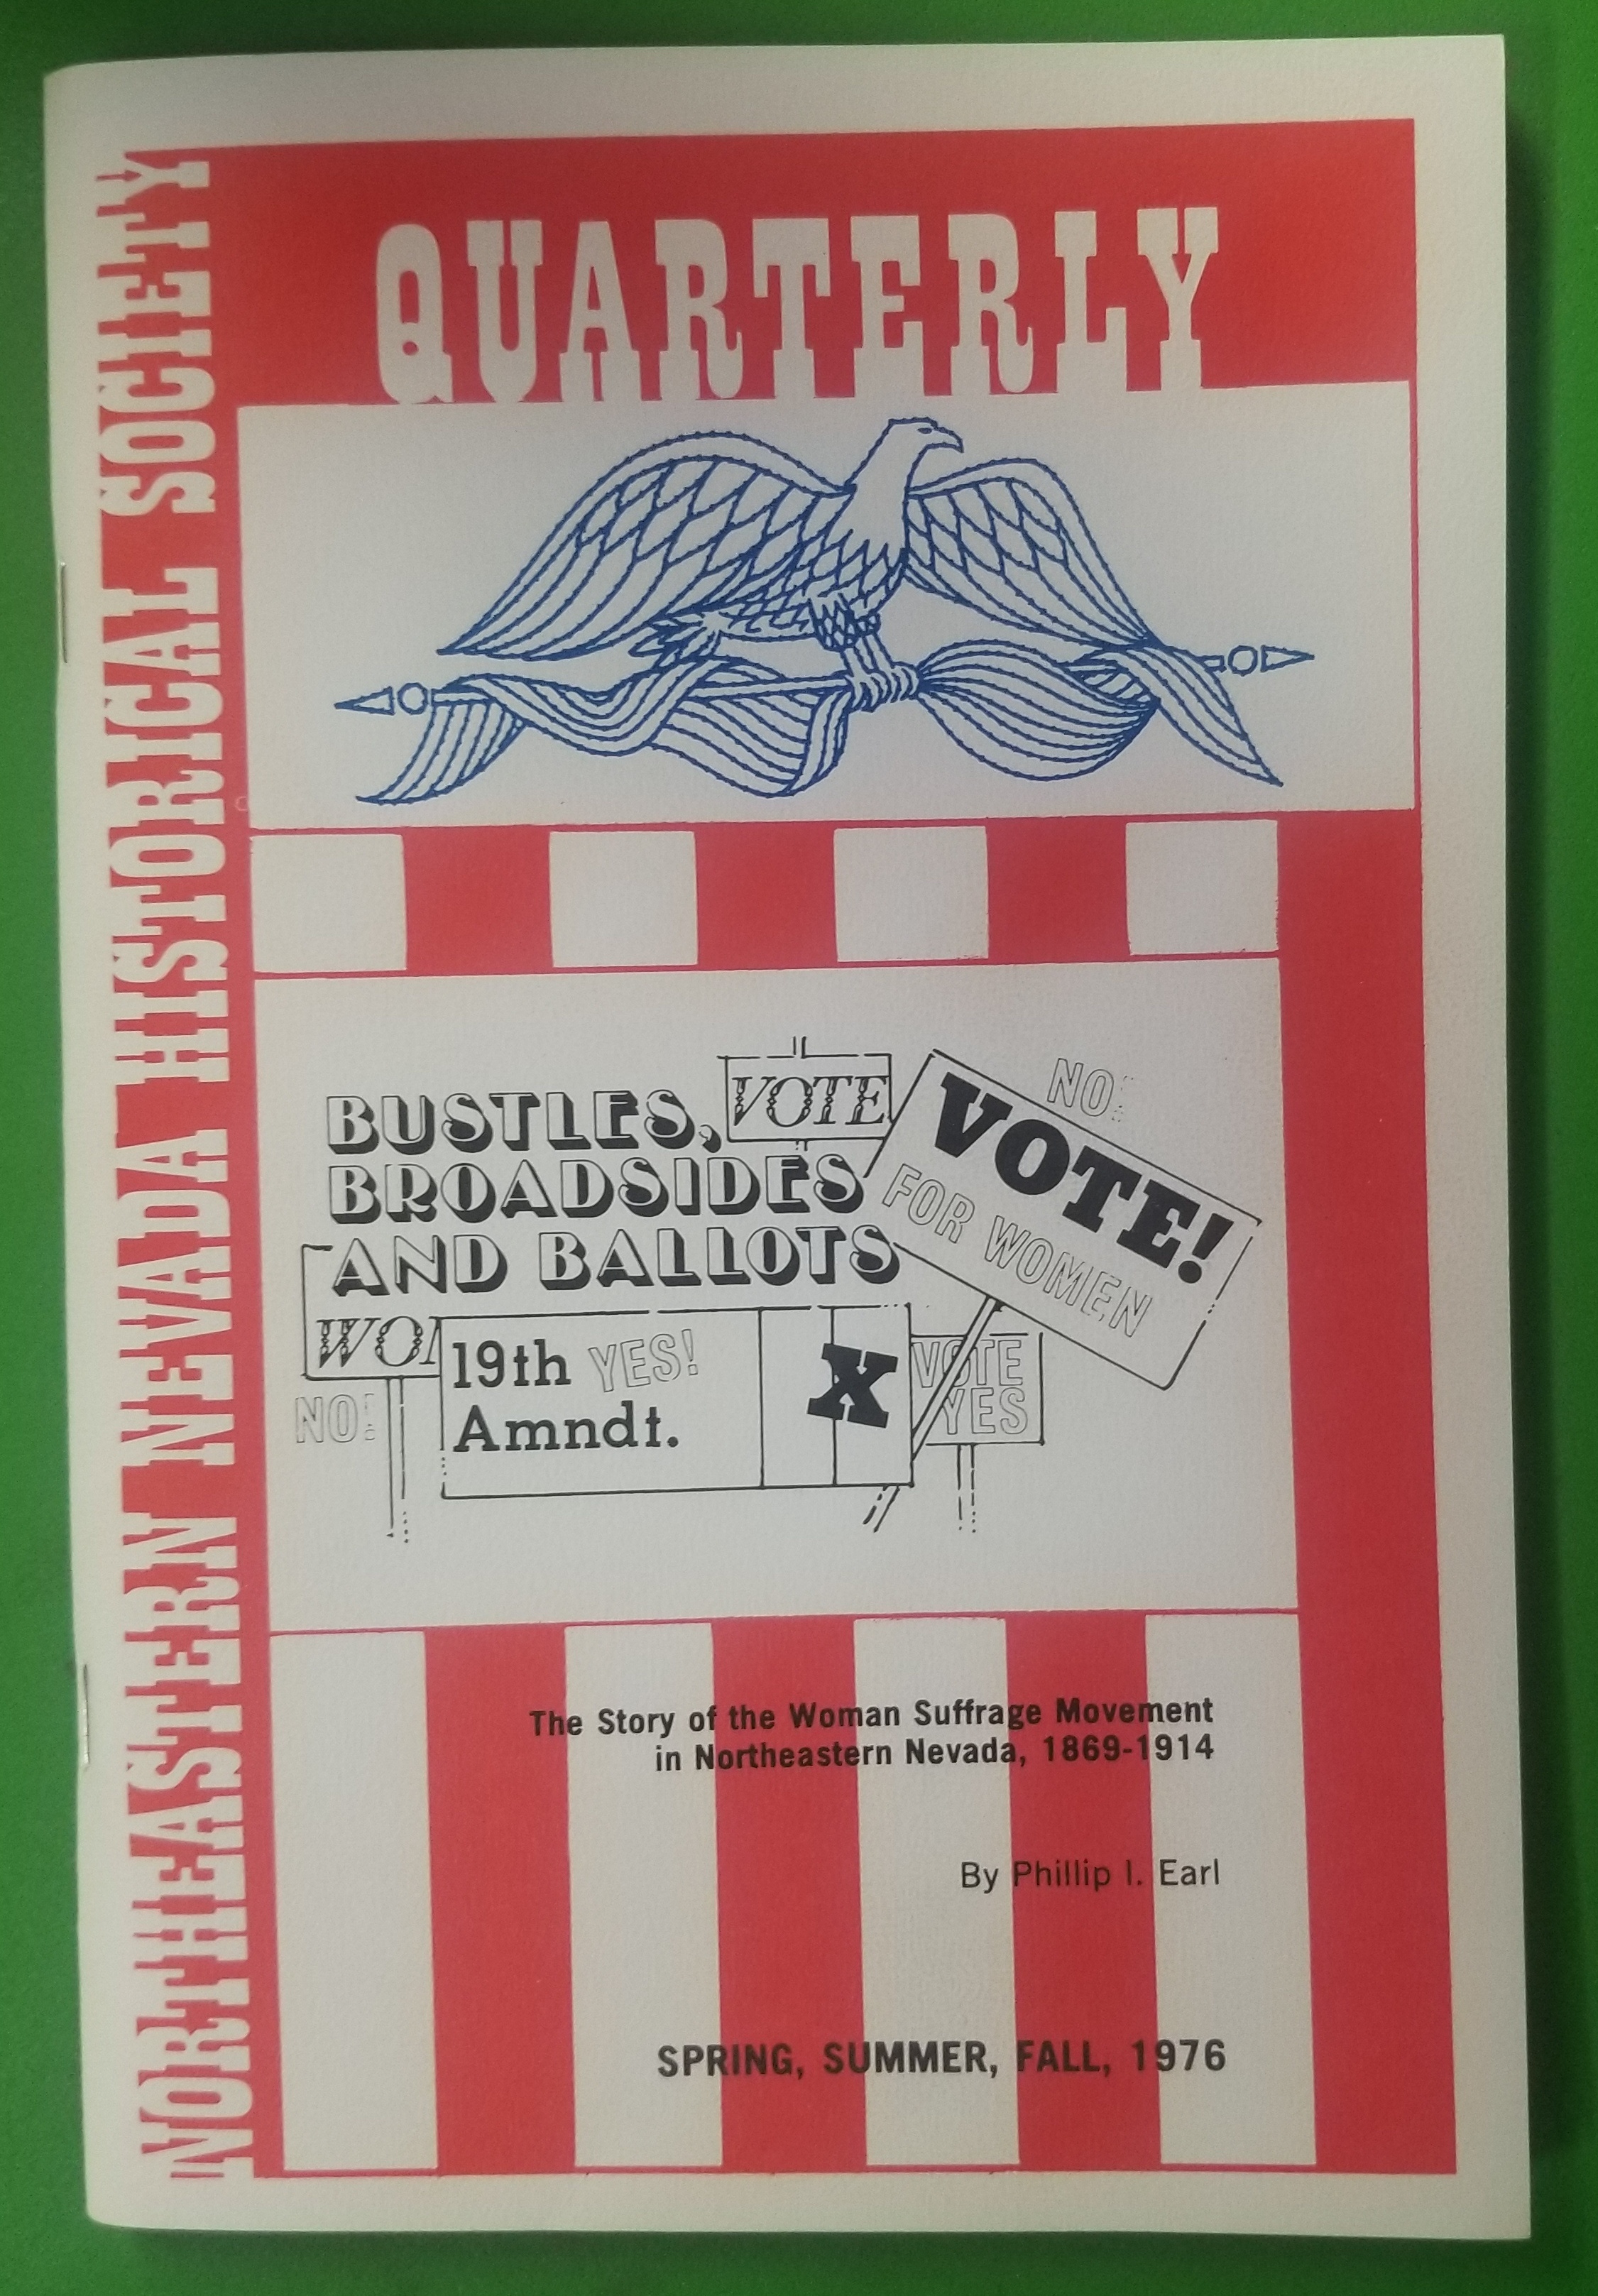 Image for Northeastern Nevada Historical Society Quarterly, Spring, Summer 1976 Bustles, Broadsides and Ballots